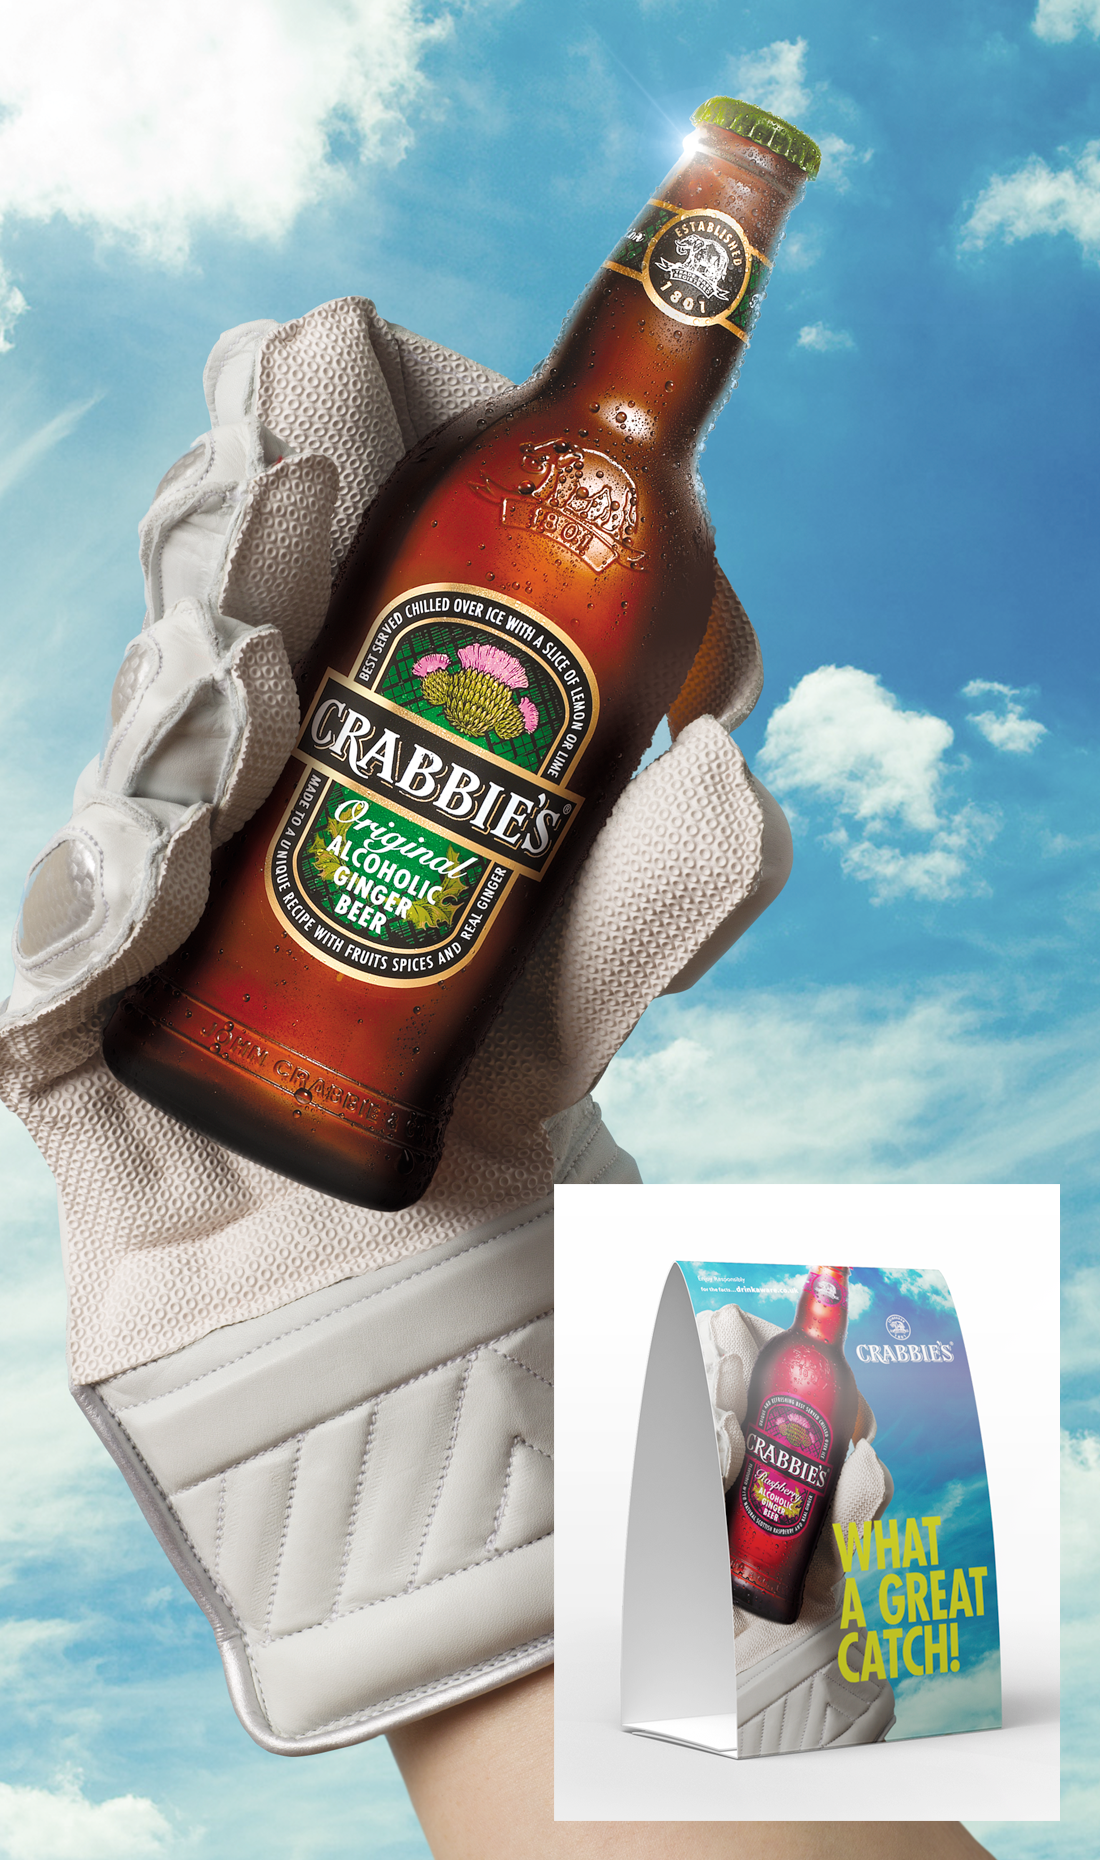 crabbies in cricket glove with tent card